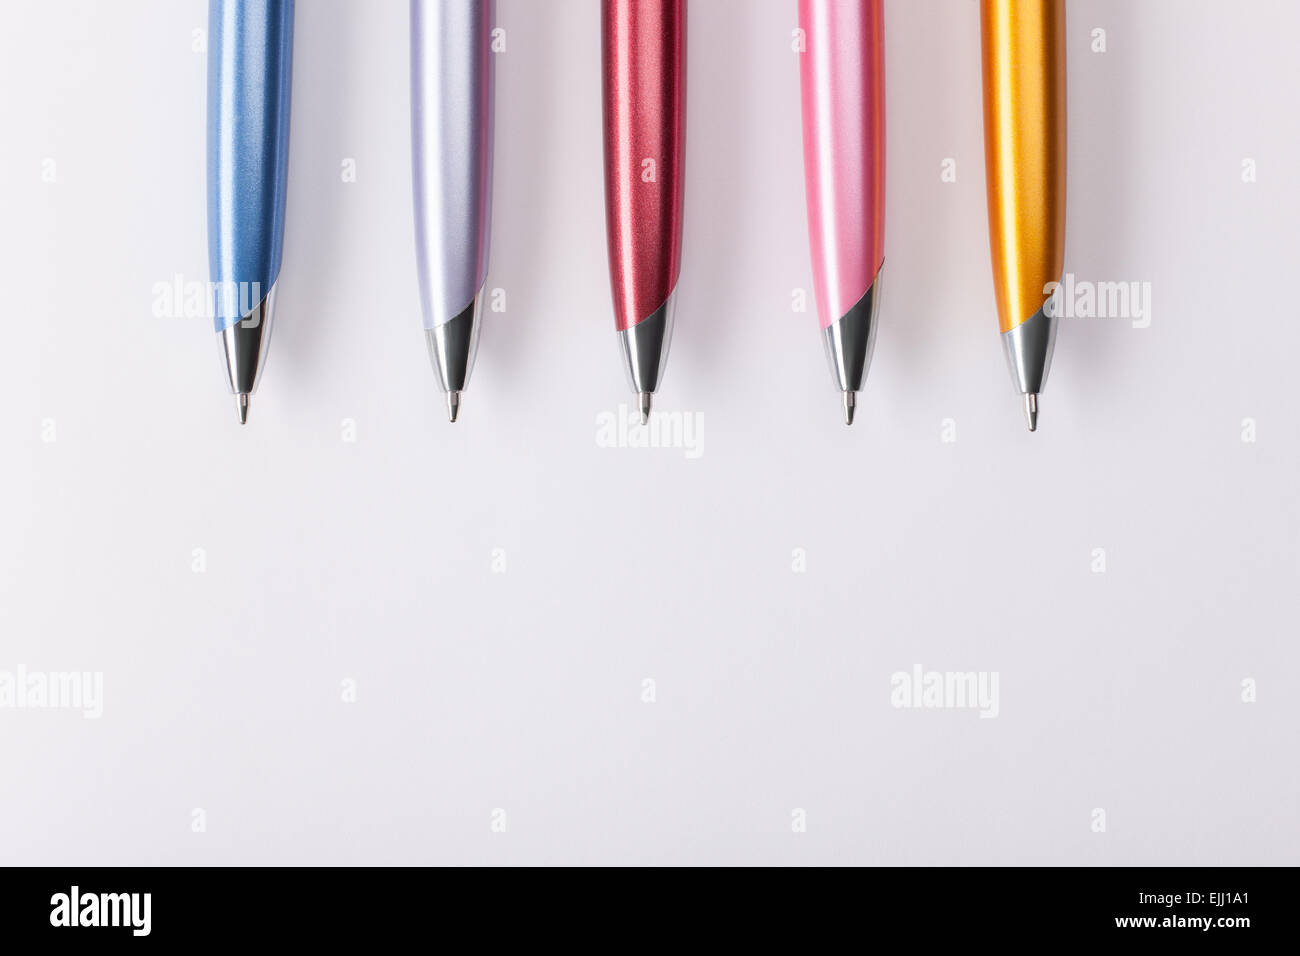 Premium Photo  Ballpoint pens on a colorful background.